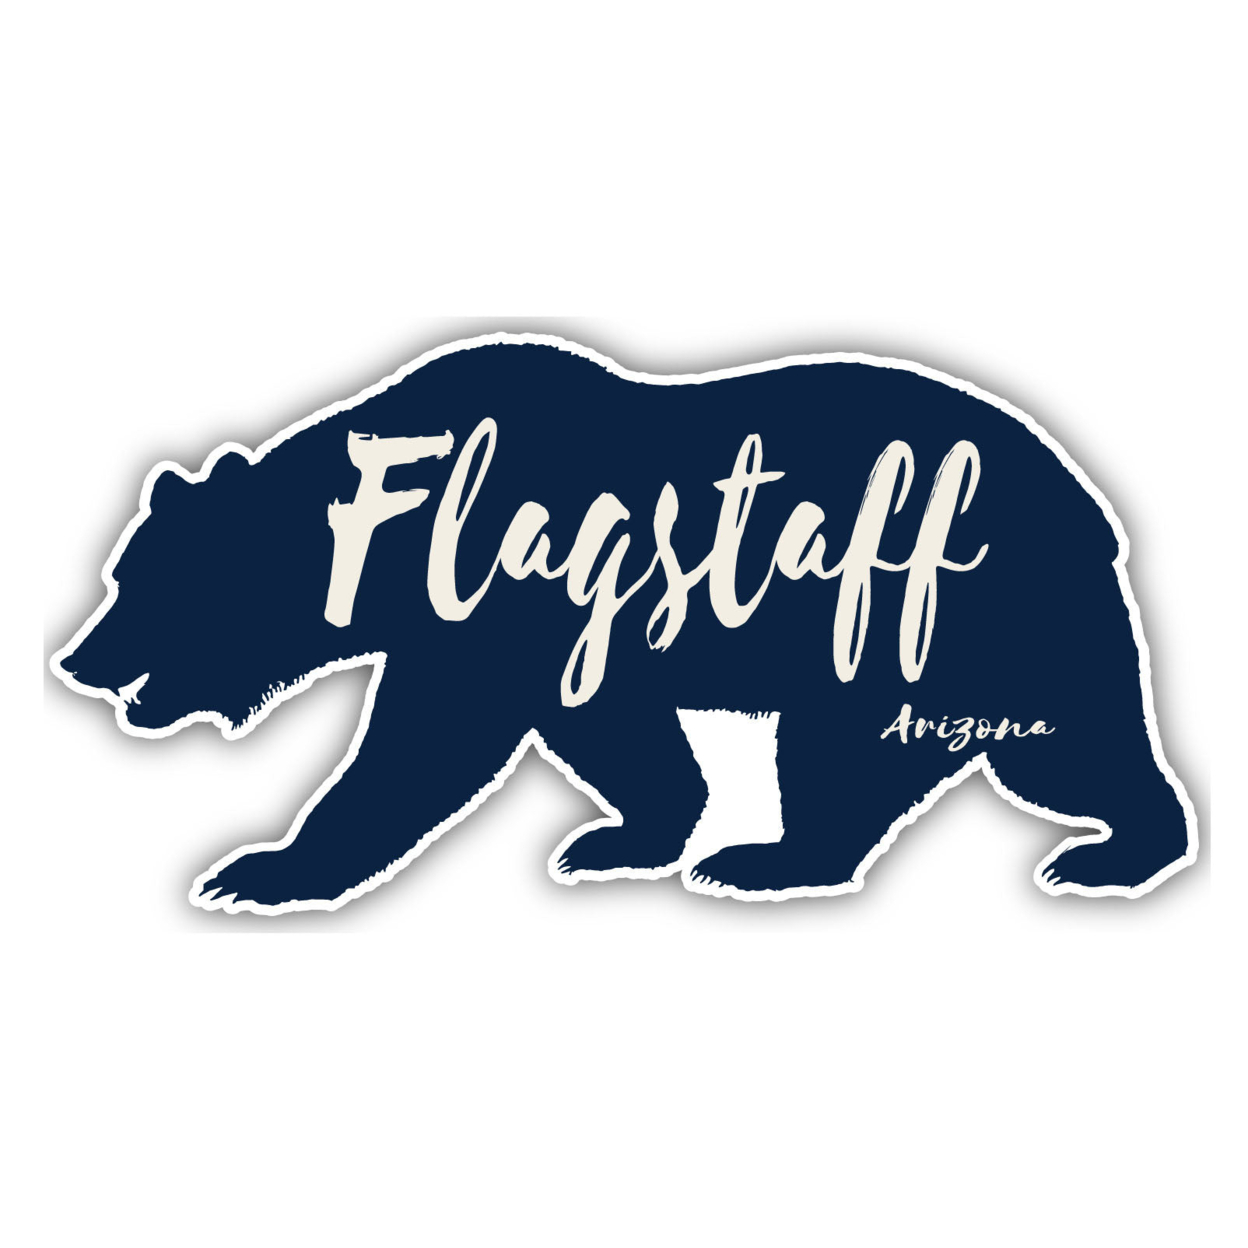 Flagstaff Arizona Souvenir Decorative Stickers (Choose Theme And Size) - 4-Pack, 10-Inch, Camp Life